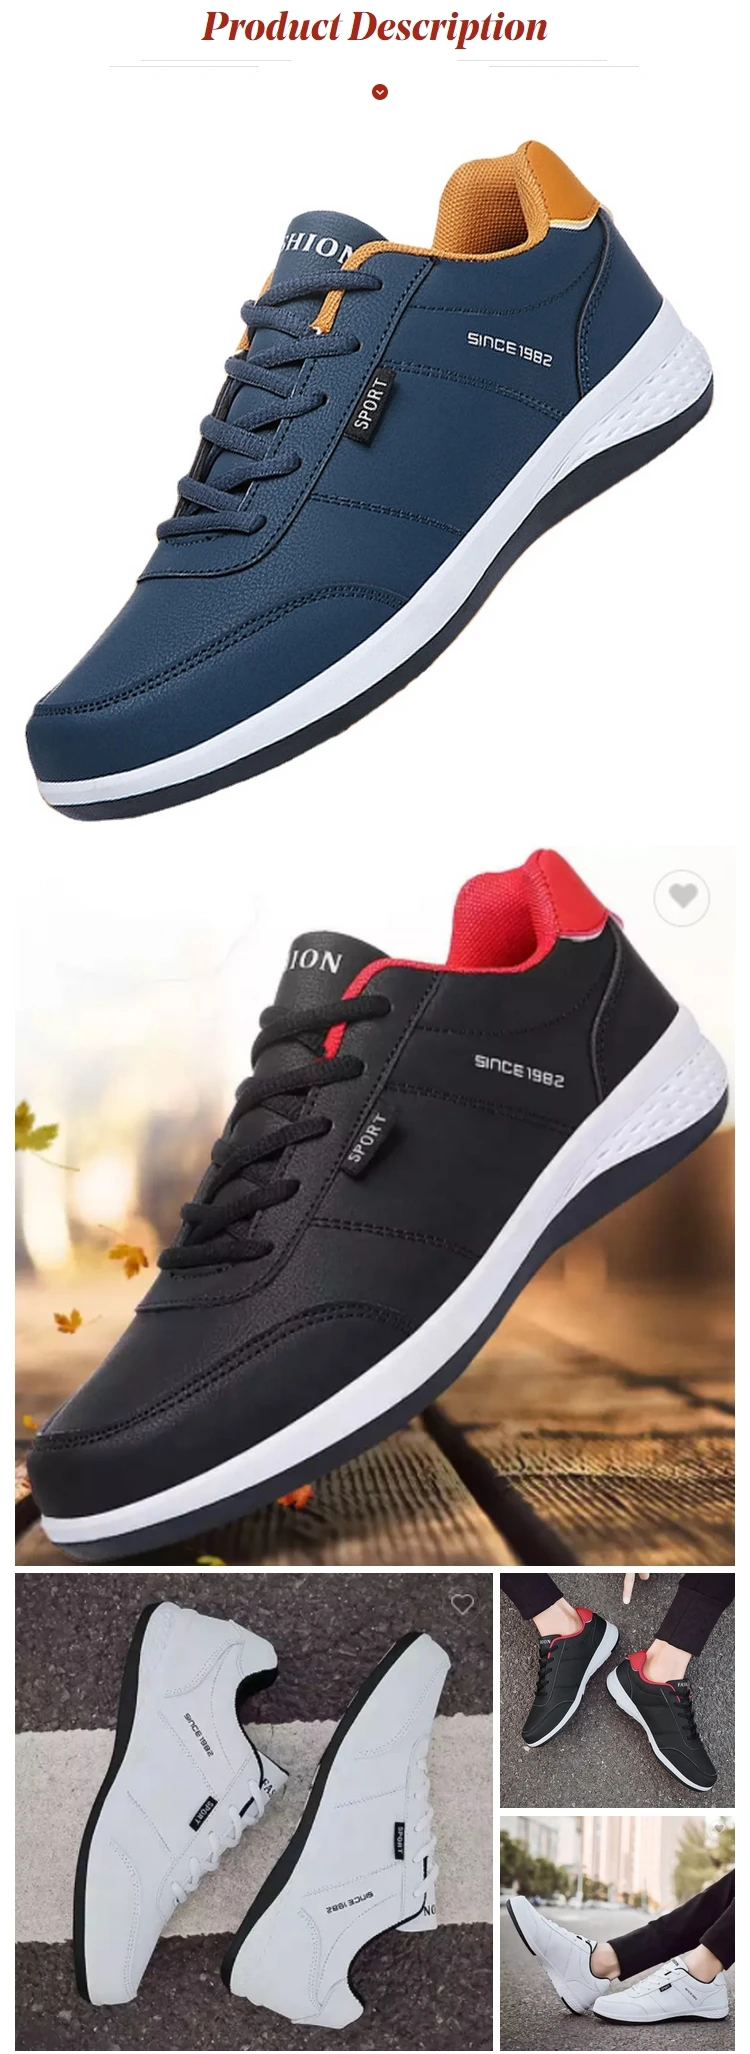 New Arrival Footwear Hot Sale Casual Sport Shoes For Men - Buy Shoes ...